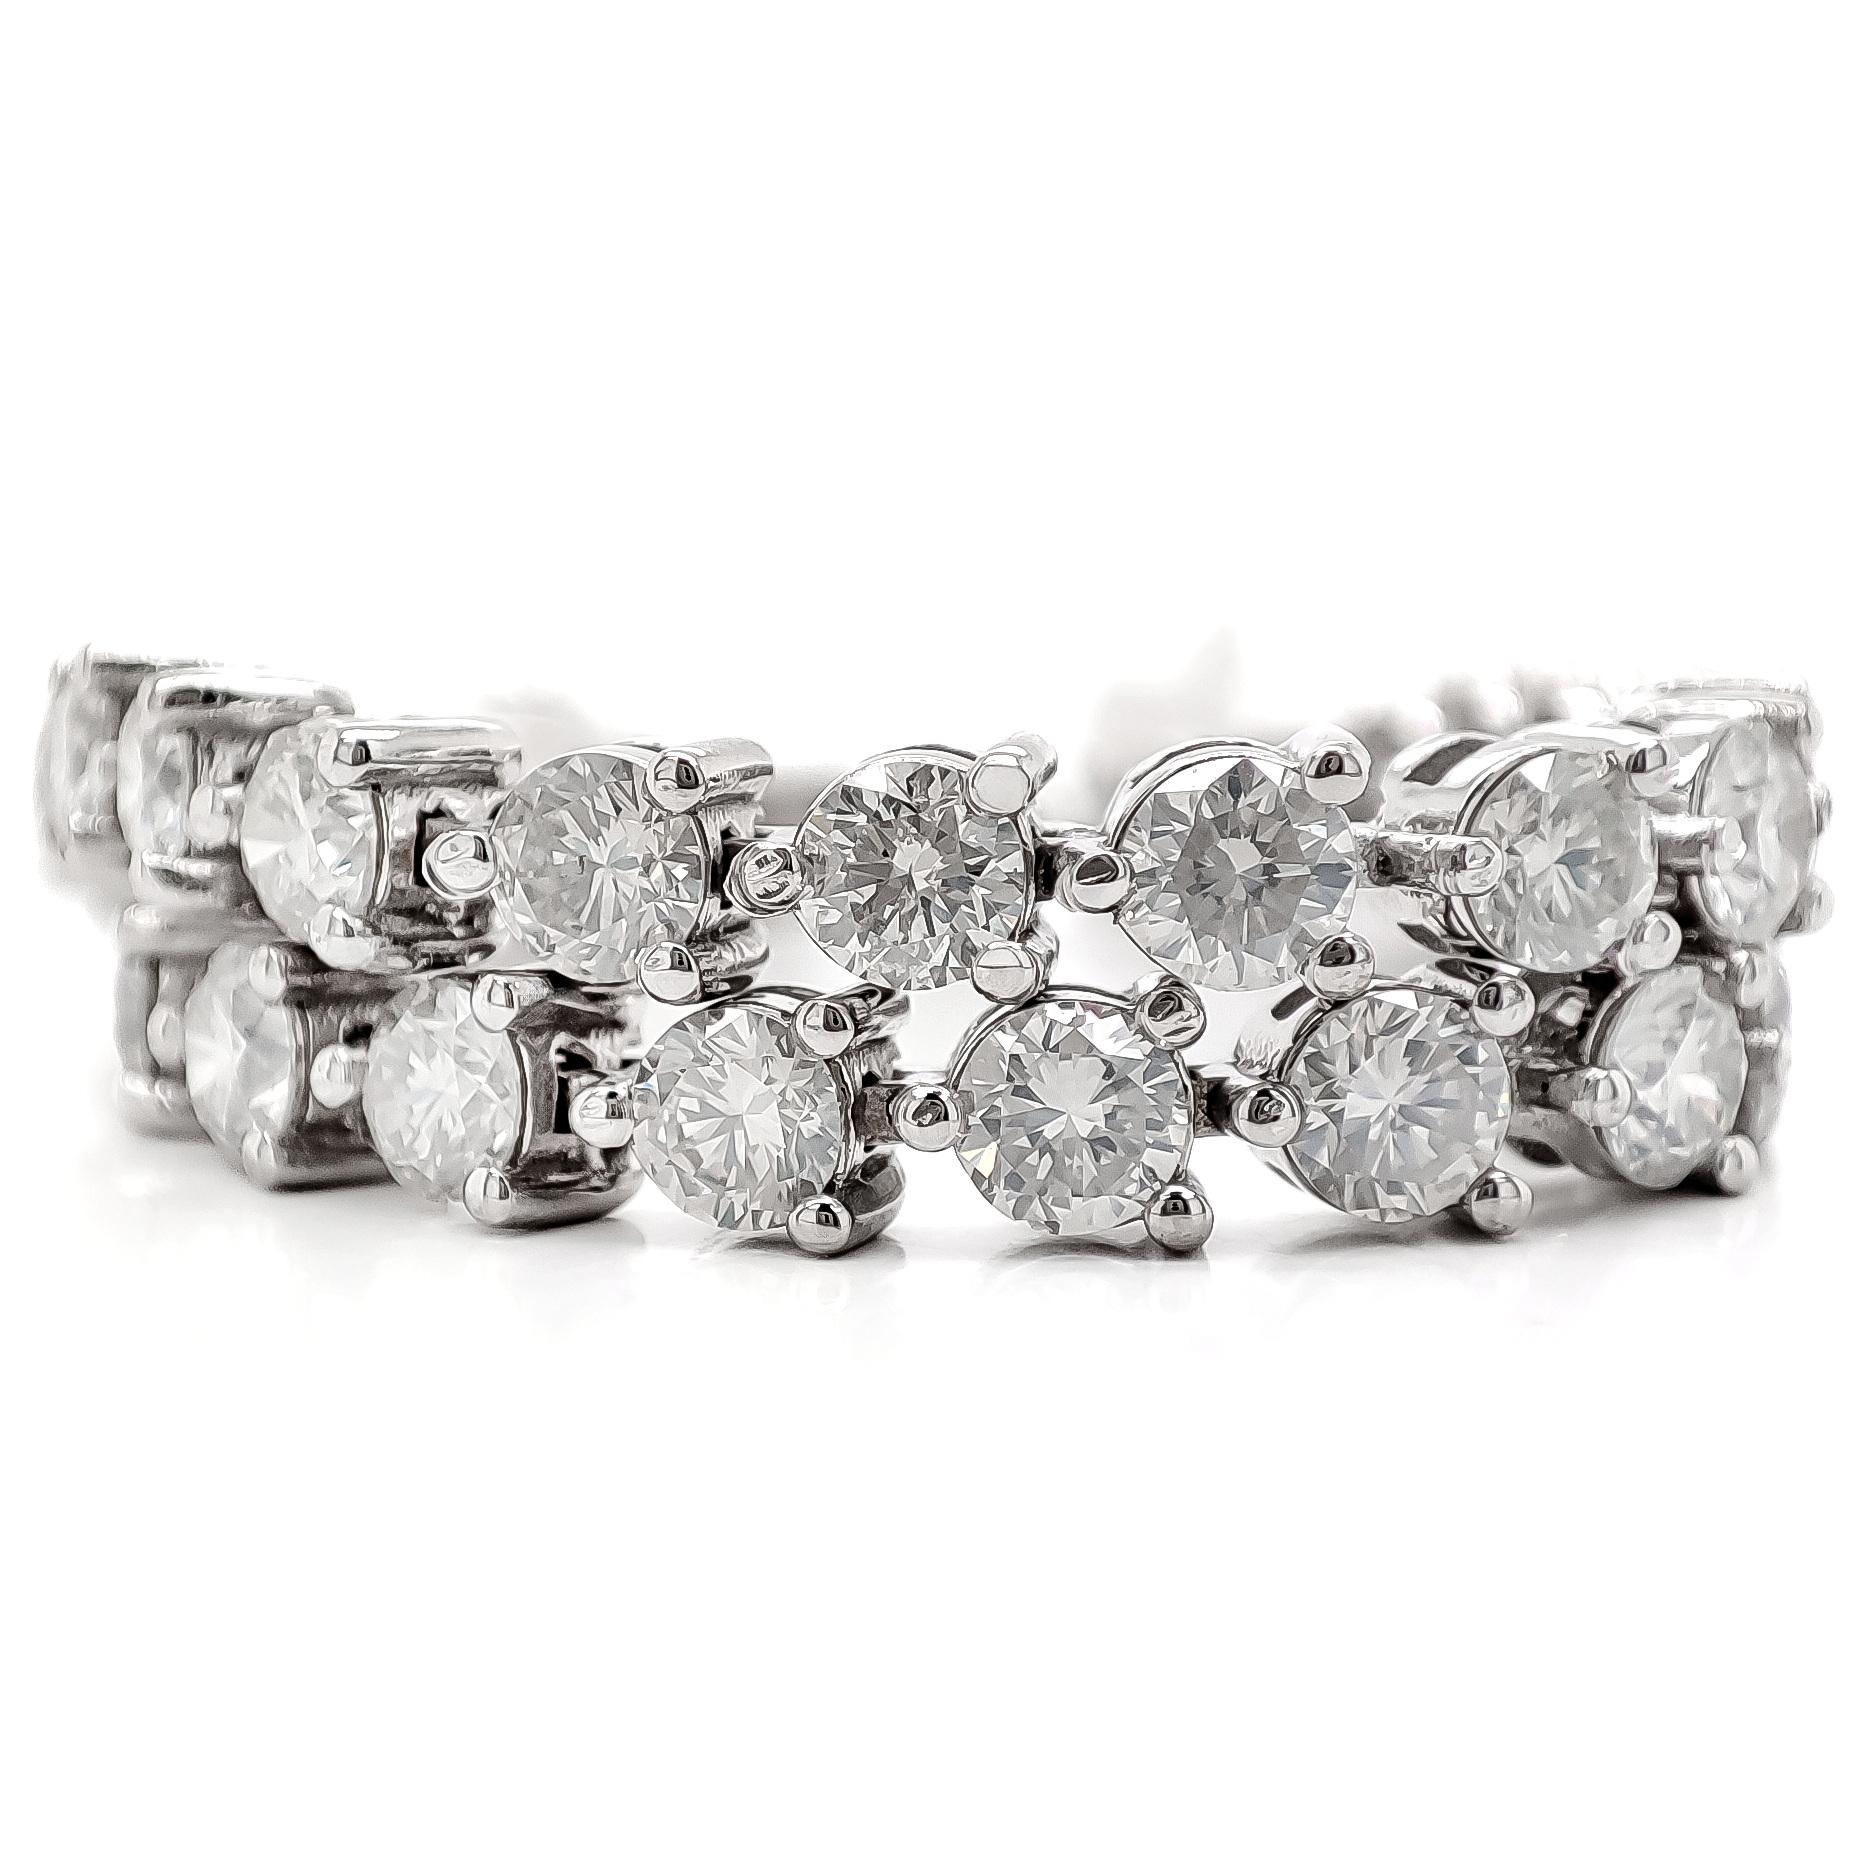 This classic and elegant 14kt white gold tennis bracelet showcases 48 endlessly sparkling diamonds, totaling 5.5 carats. This bracelet will give your favorite outfits an unforgettable sparkle. 
For more information, please check the attached